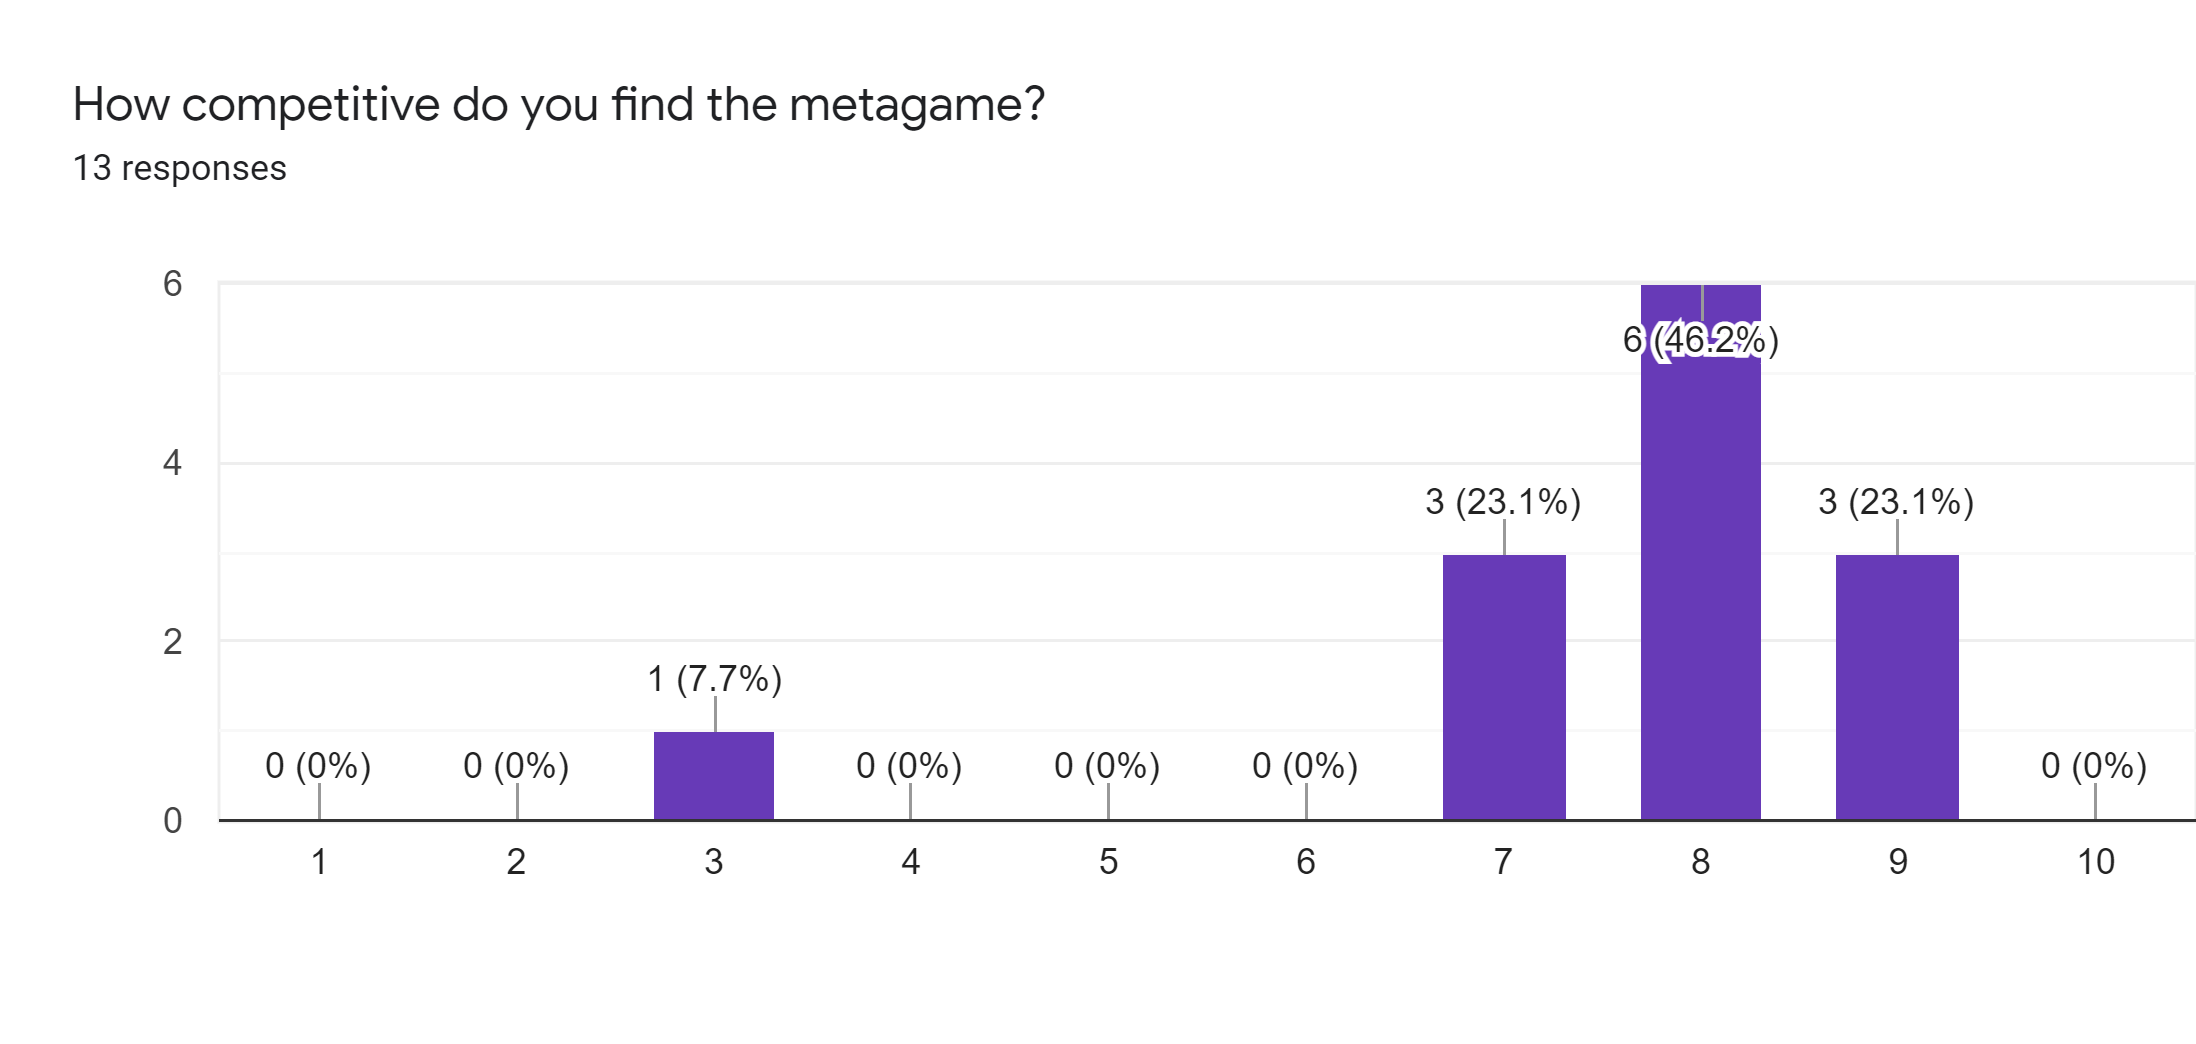 Forms response chart. Question title: How competitive do you find the metagame?. Number of responses: 13 responses.